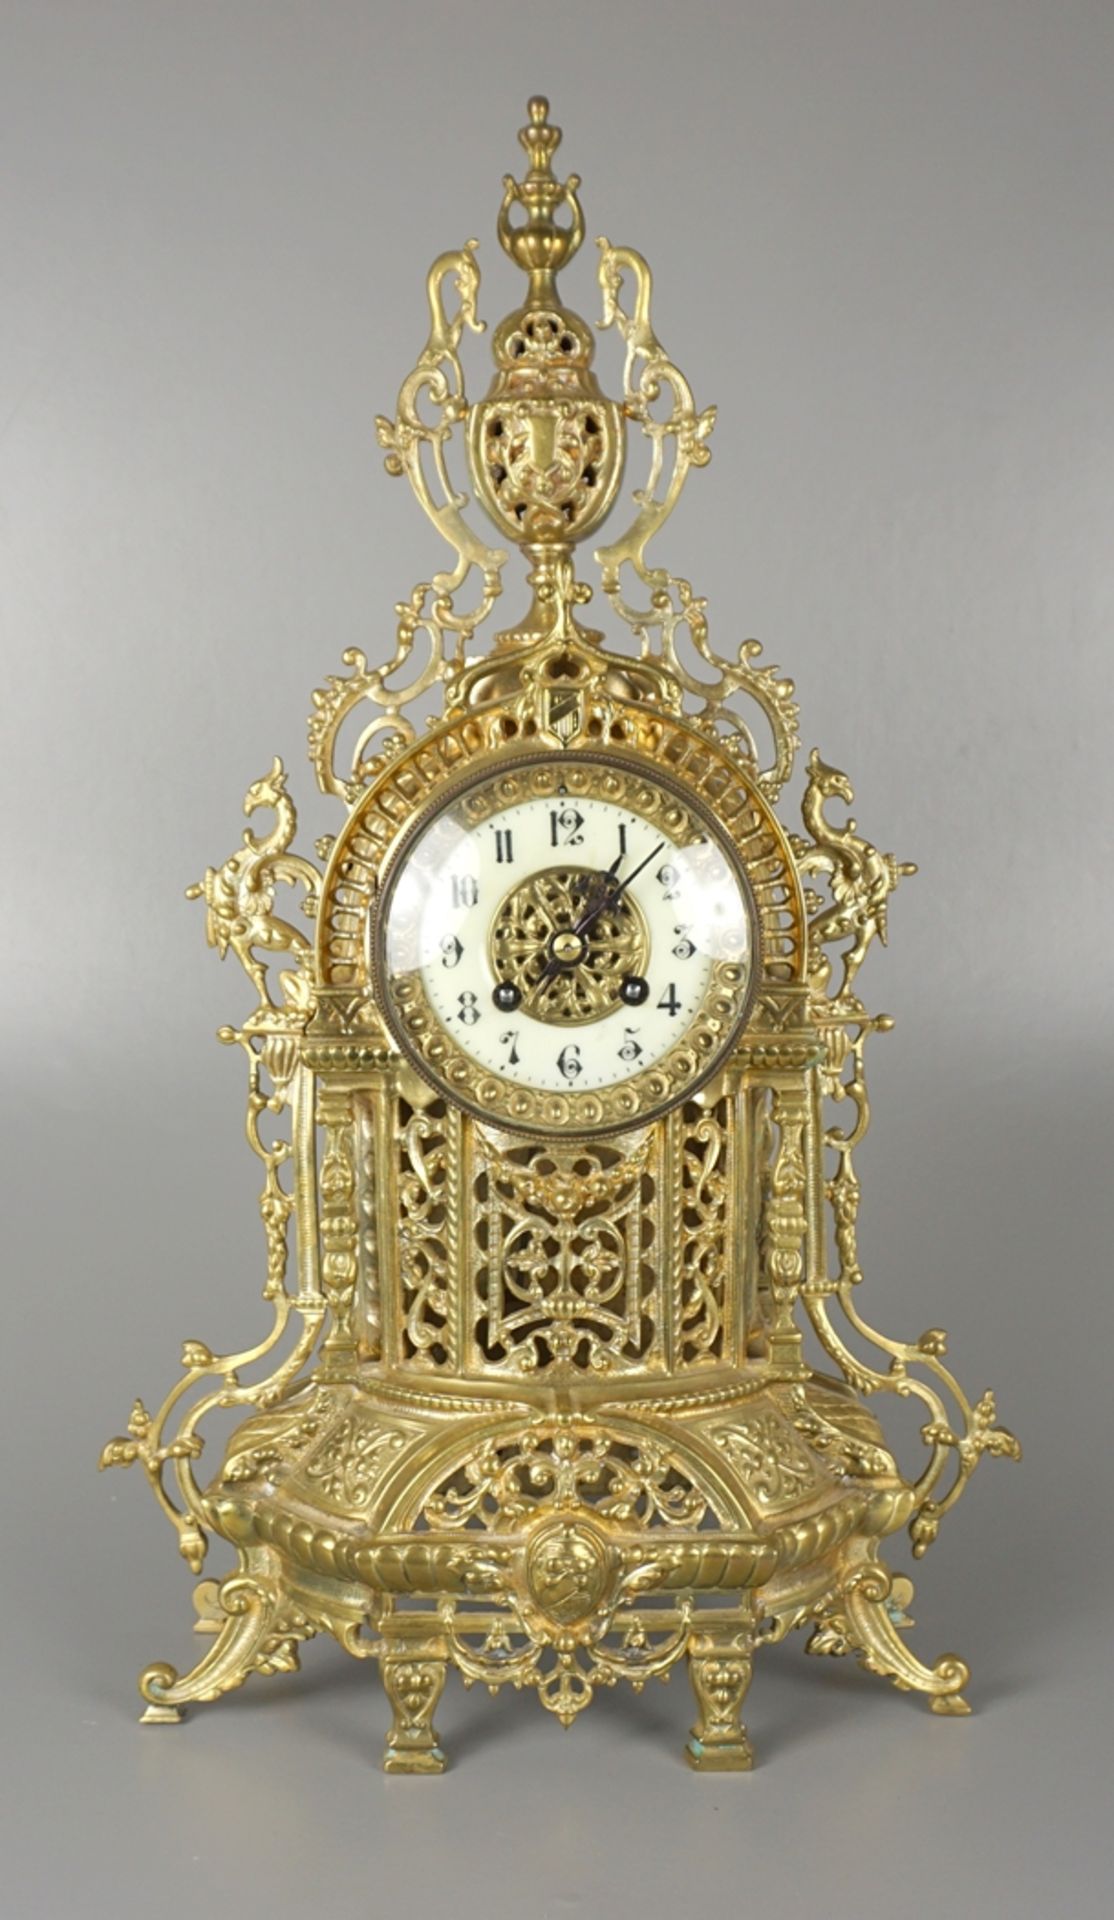 magnificent mantel clock with side plates, brass, 20th cent.